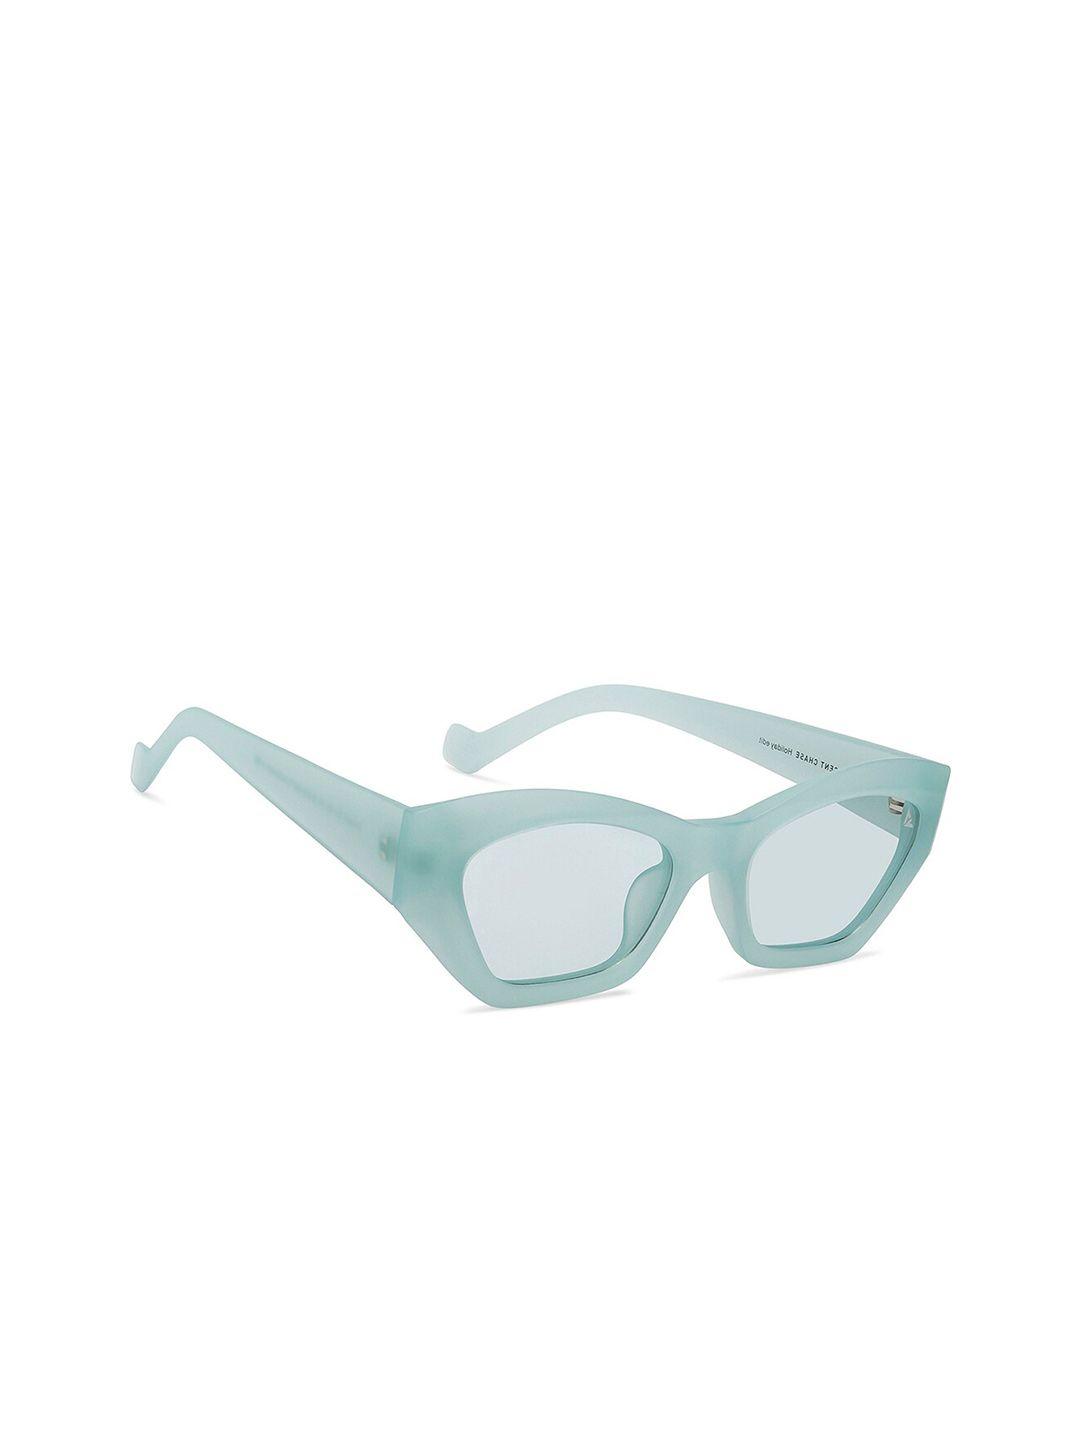 vincent chase women cateye sunglasses with uv protected lens